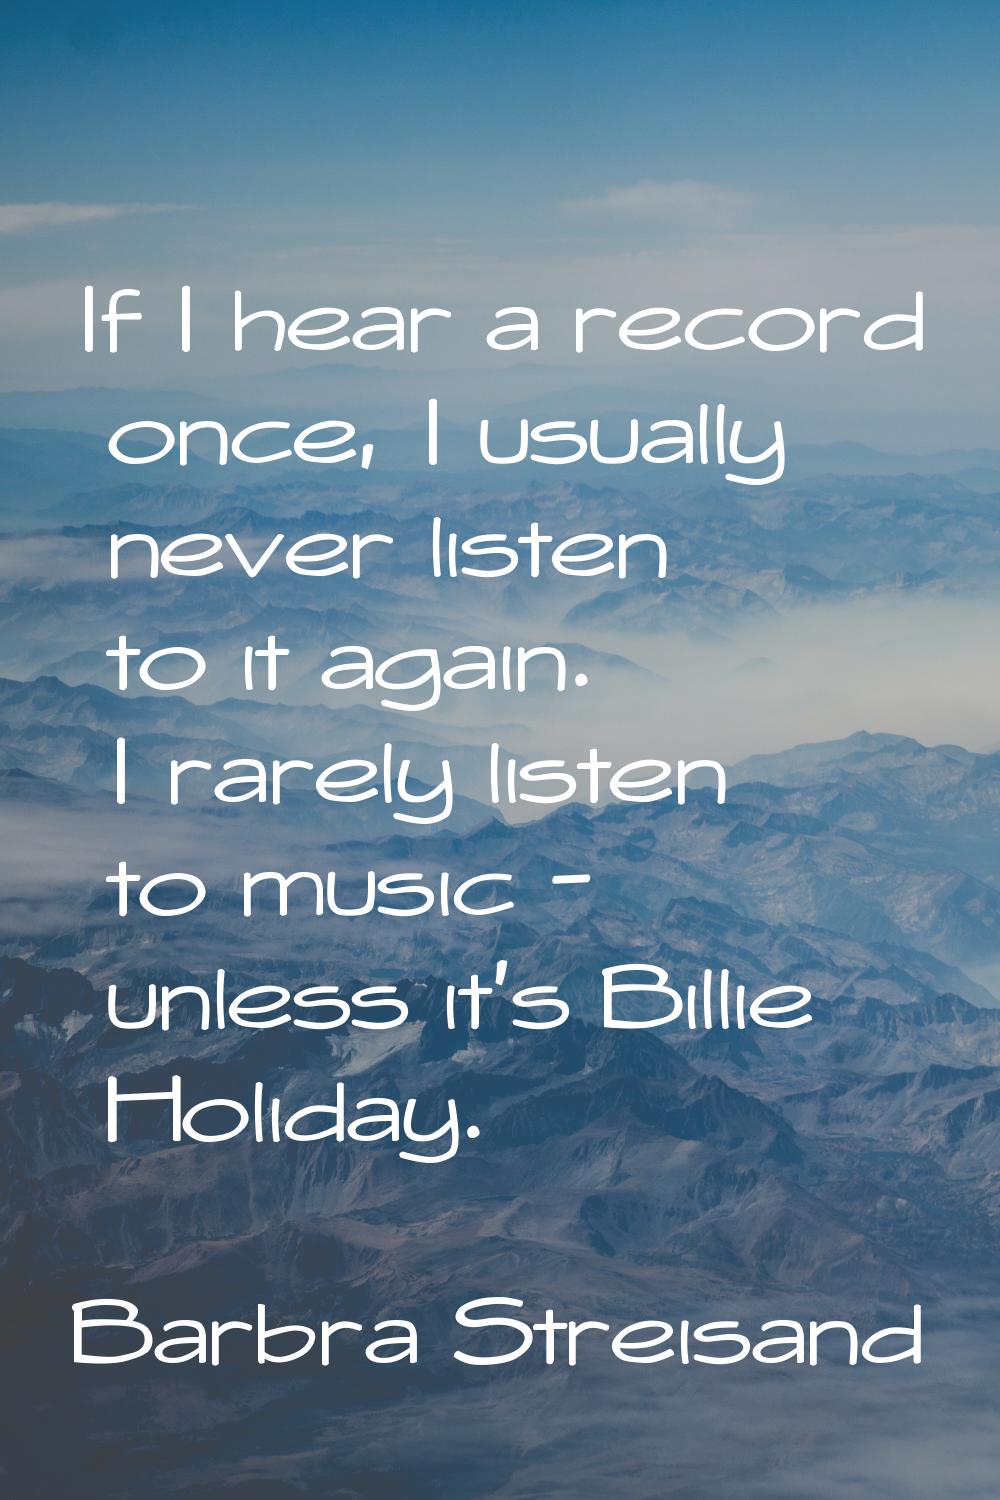 If I hear a record once, I usually never listen to it again. I rarely listen to music - unless it's